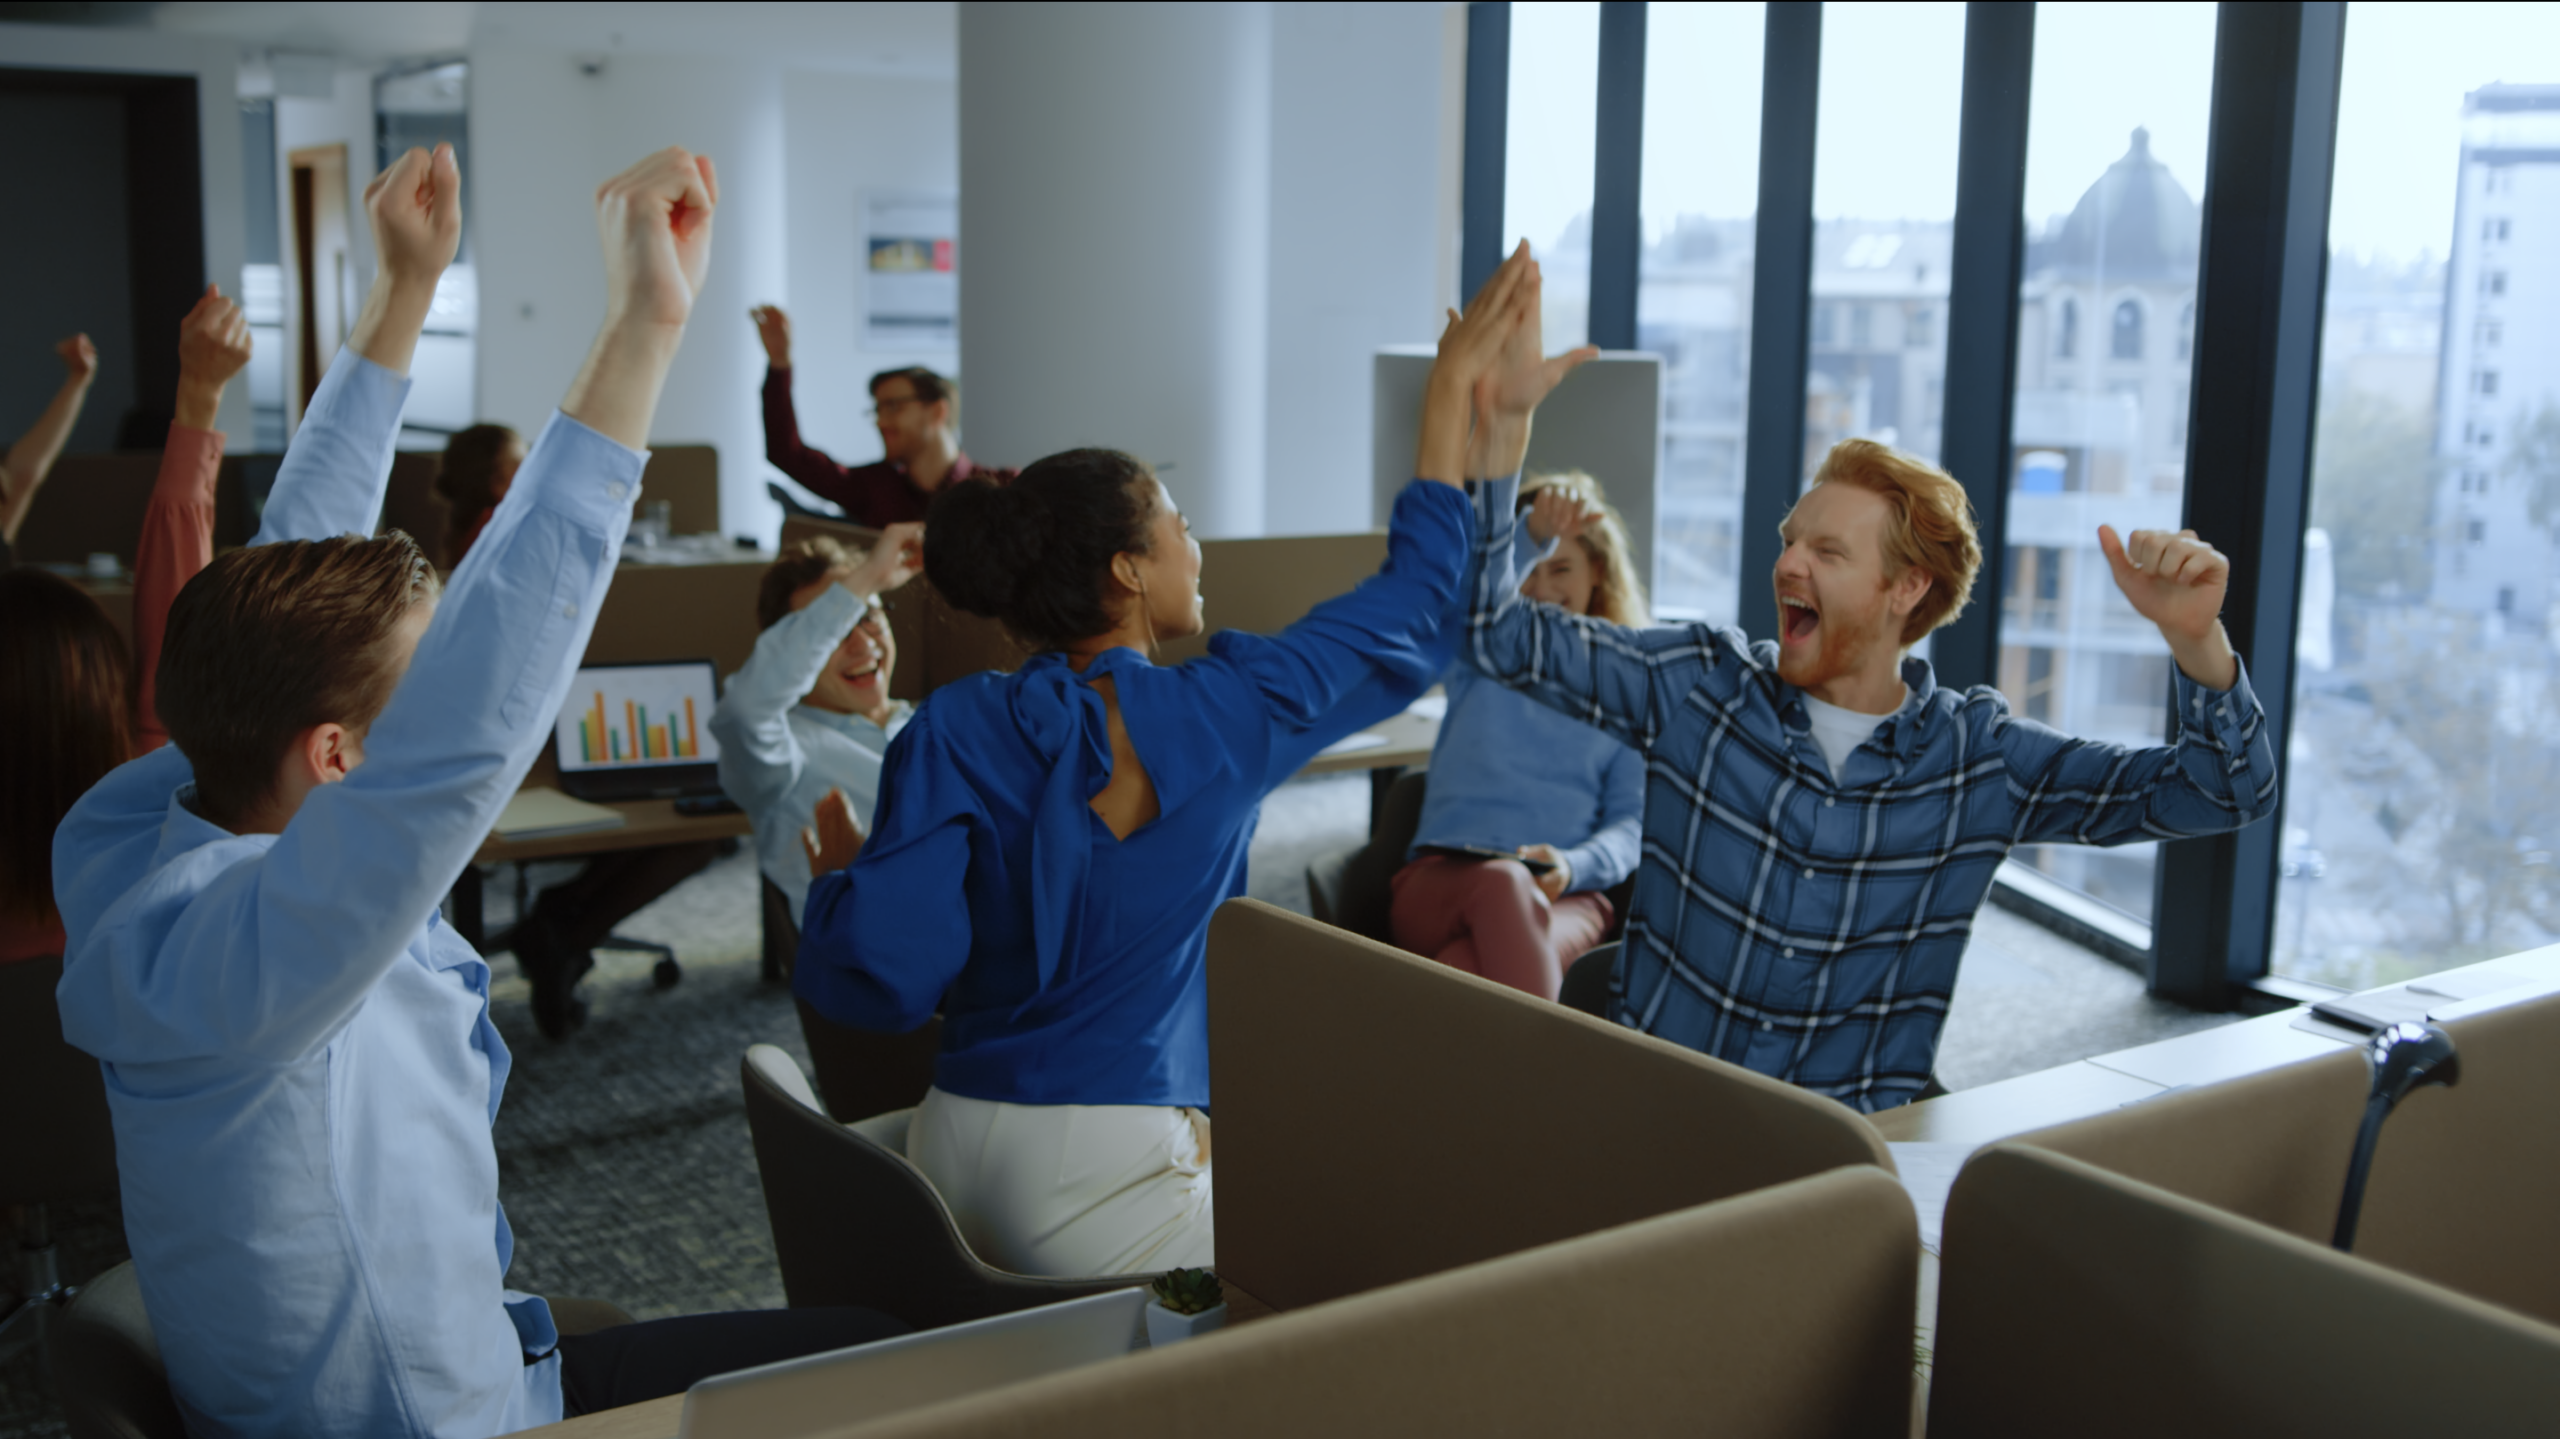 Screenshot of a stock footage item. The screenshot shows an office scene with a large group of people excitedly cheering and celebrating.